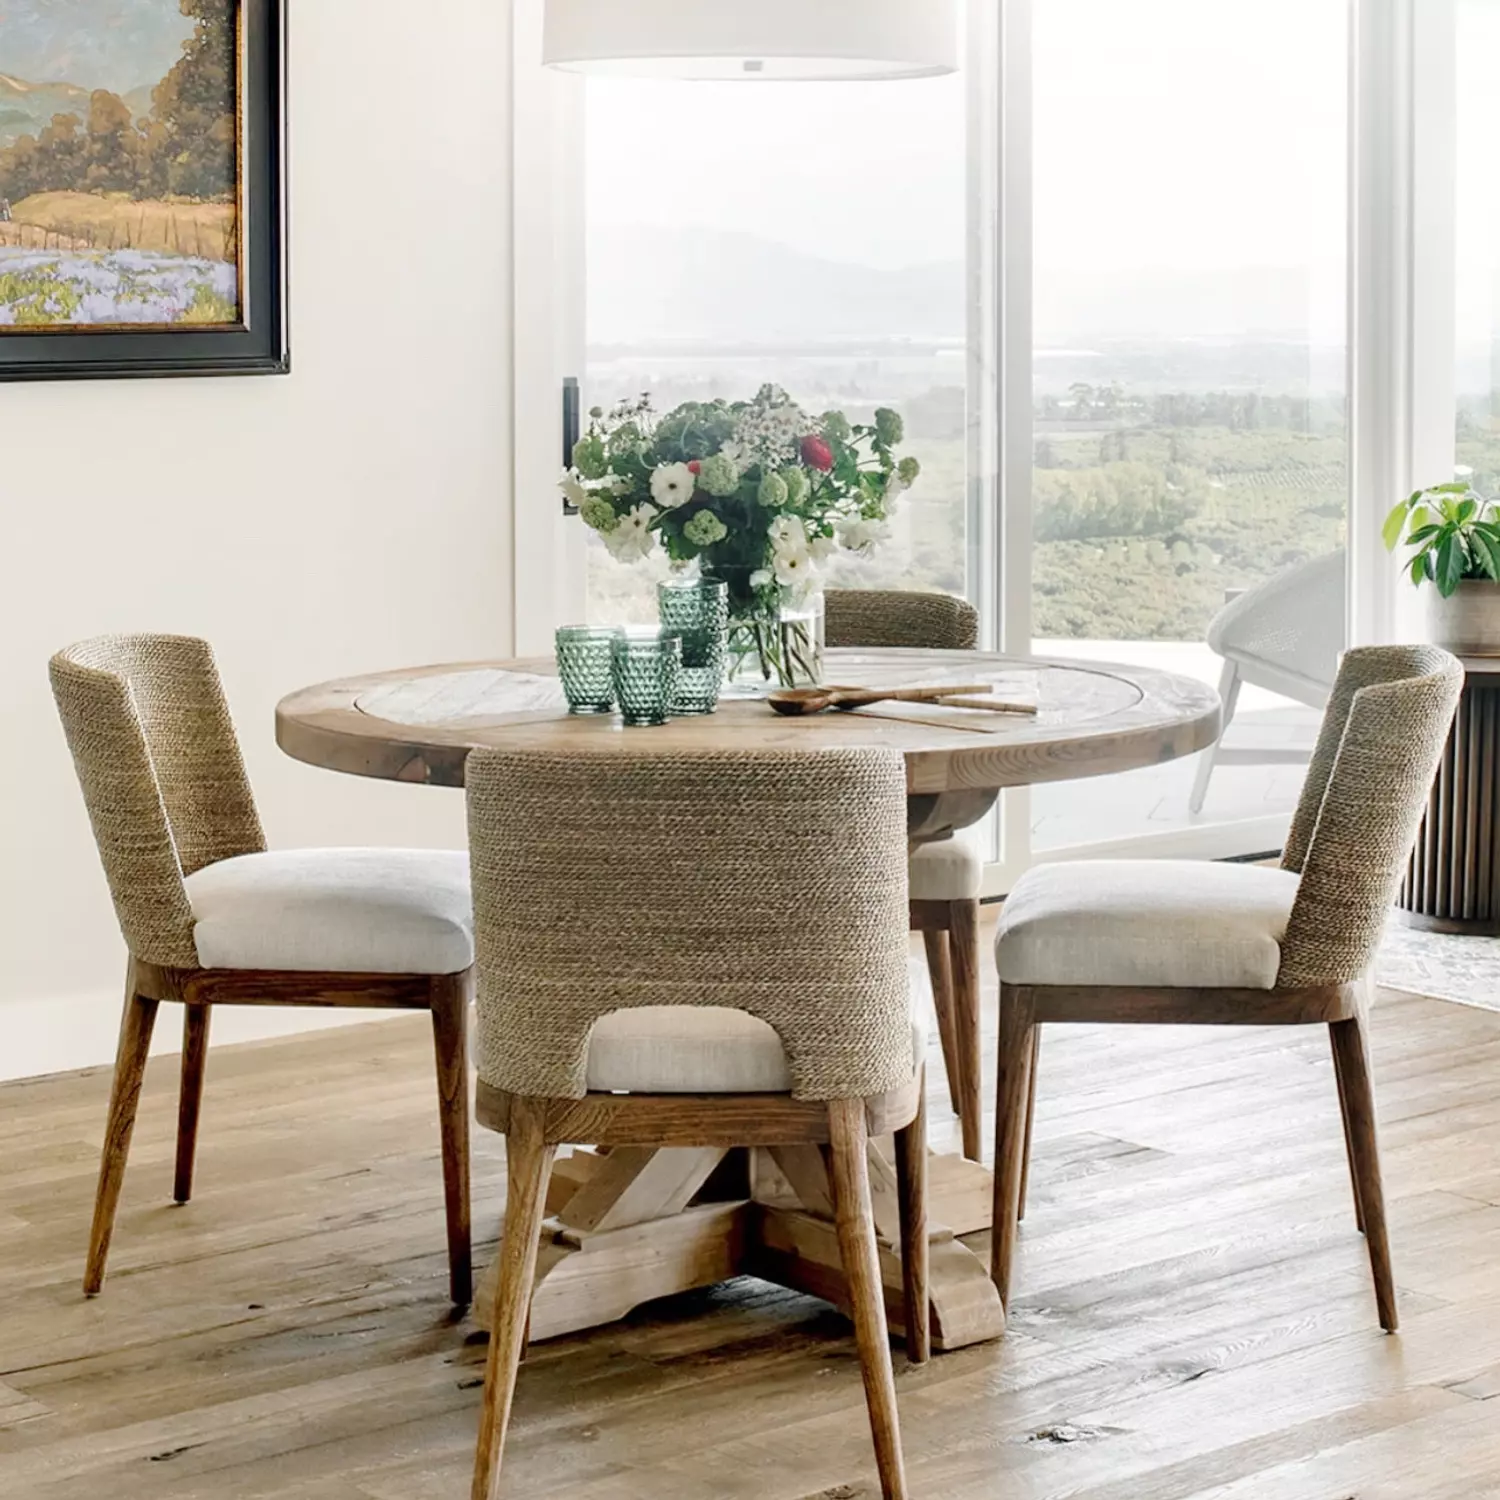 Moro dining table & chairs hover image